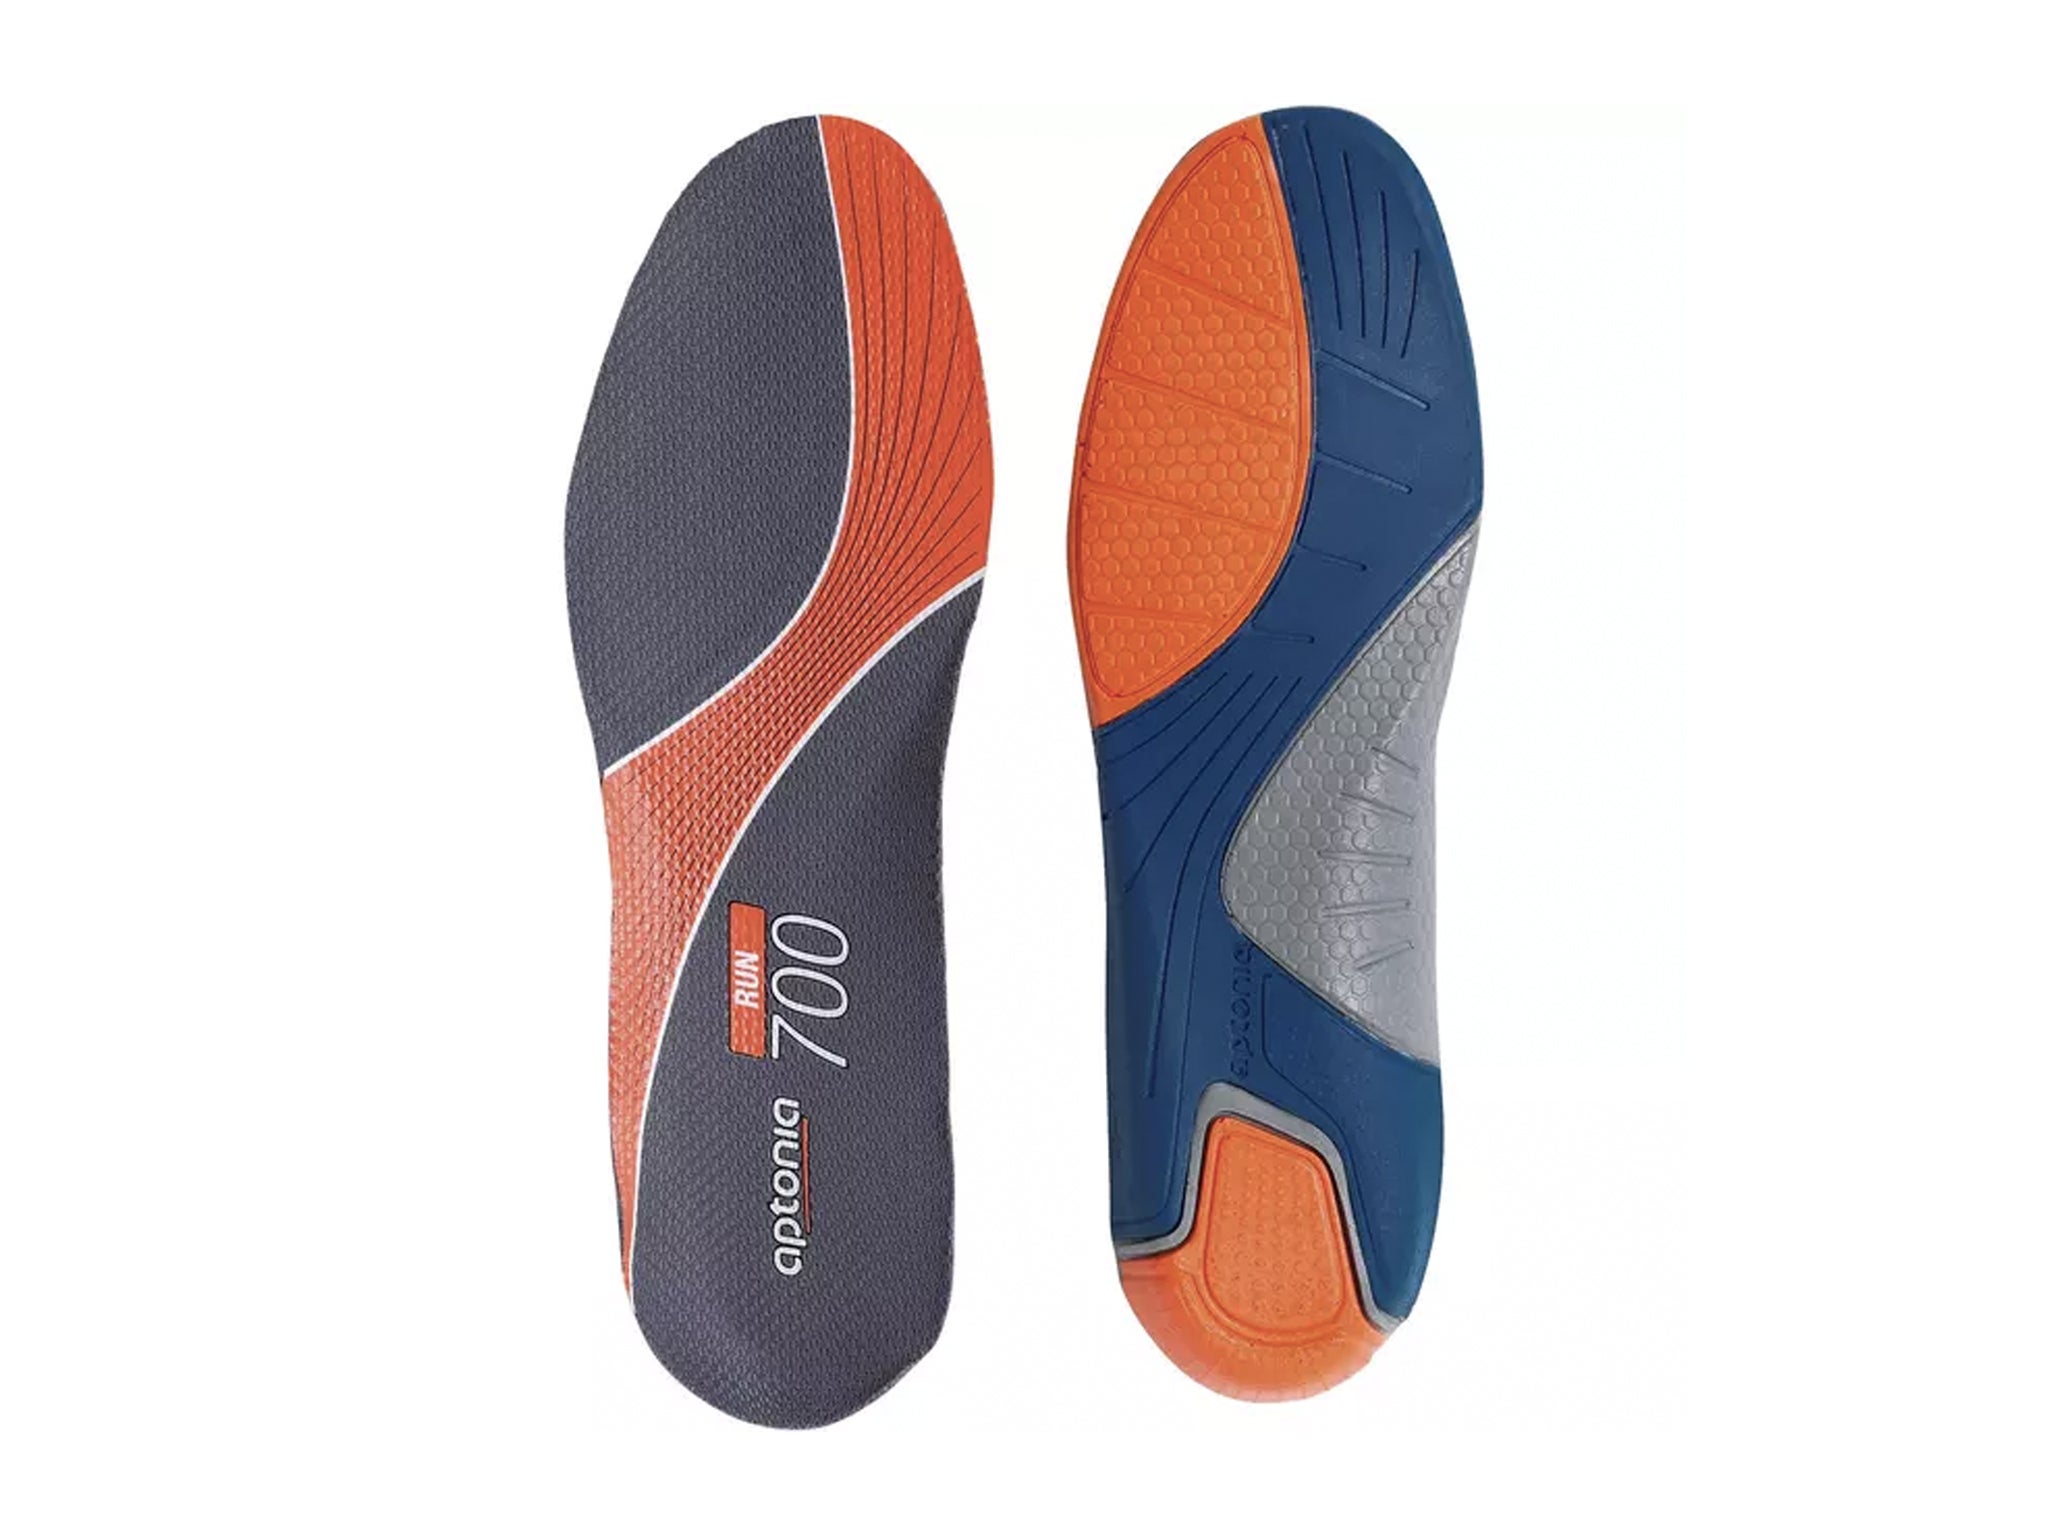 Running,Hiking Comfort Insoles for Walking PCSsole Gel Sport Insoles Work boot Shoe Inserts for Men and Women 